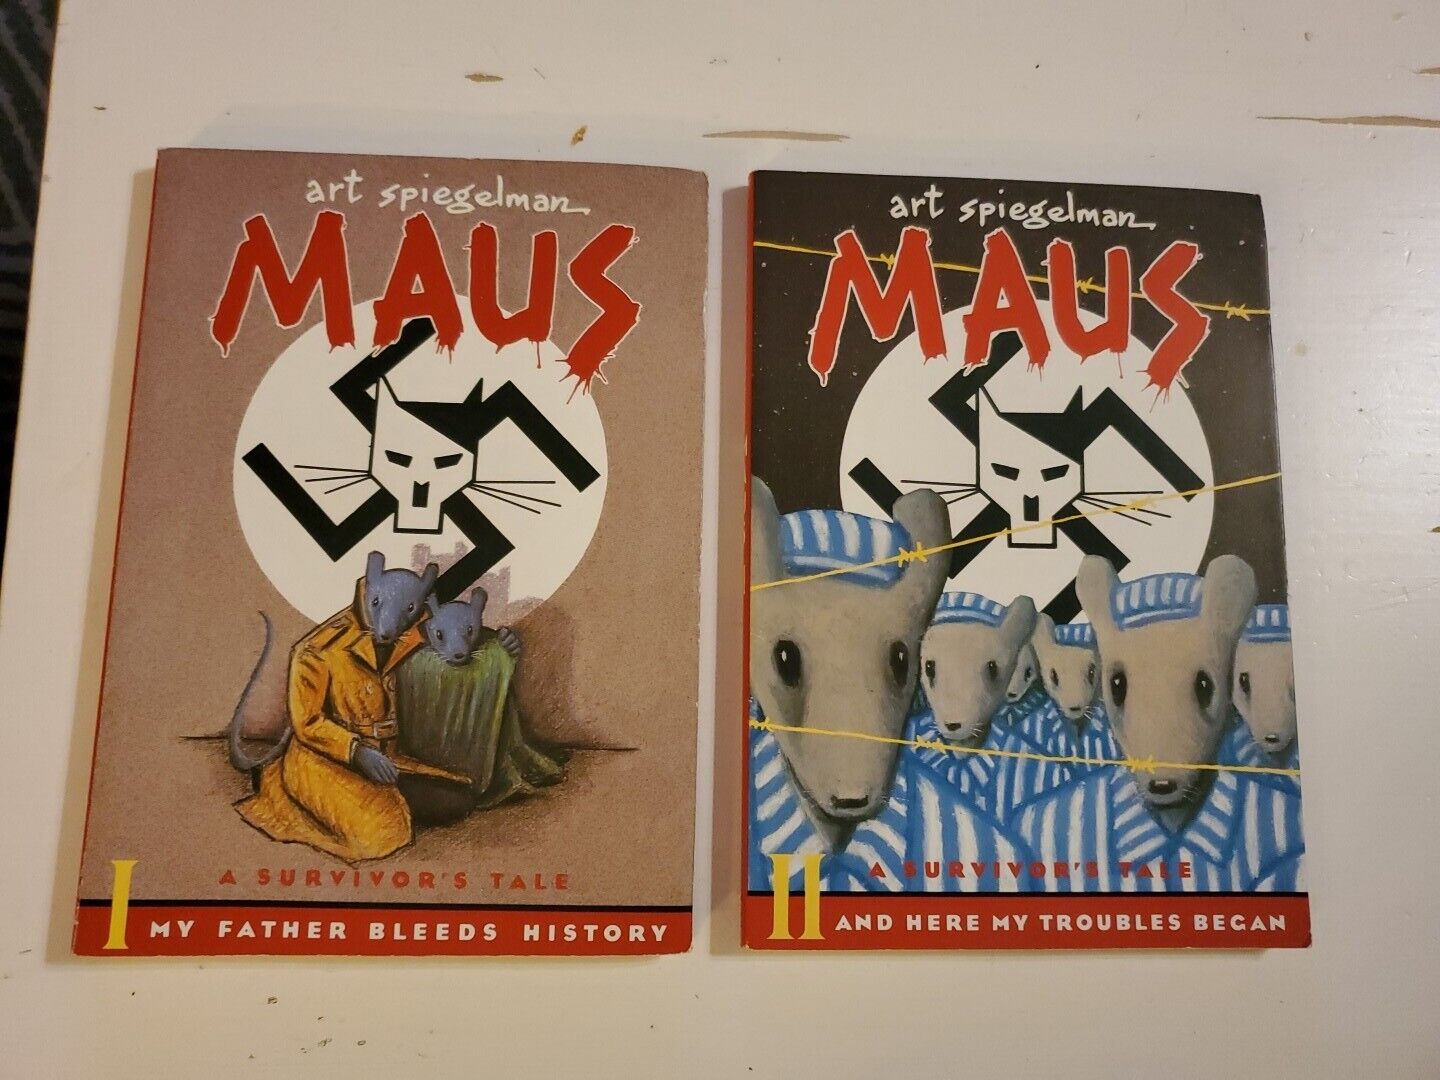 The Complete Maus (Art Spigelman, Volumes 1 and 2)